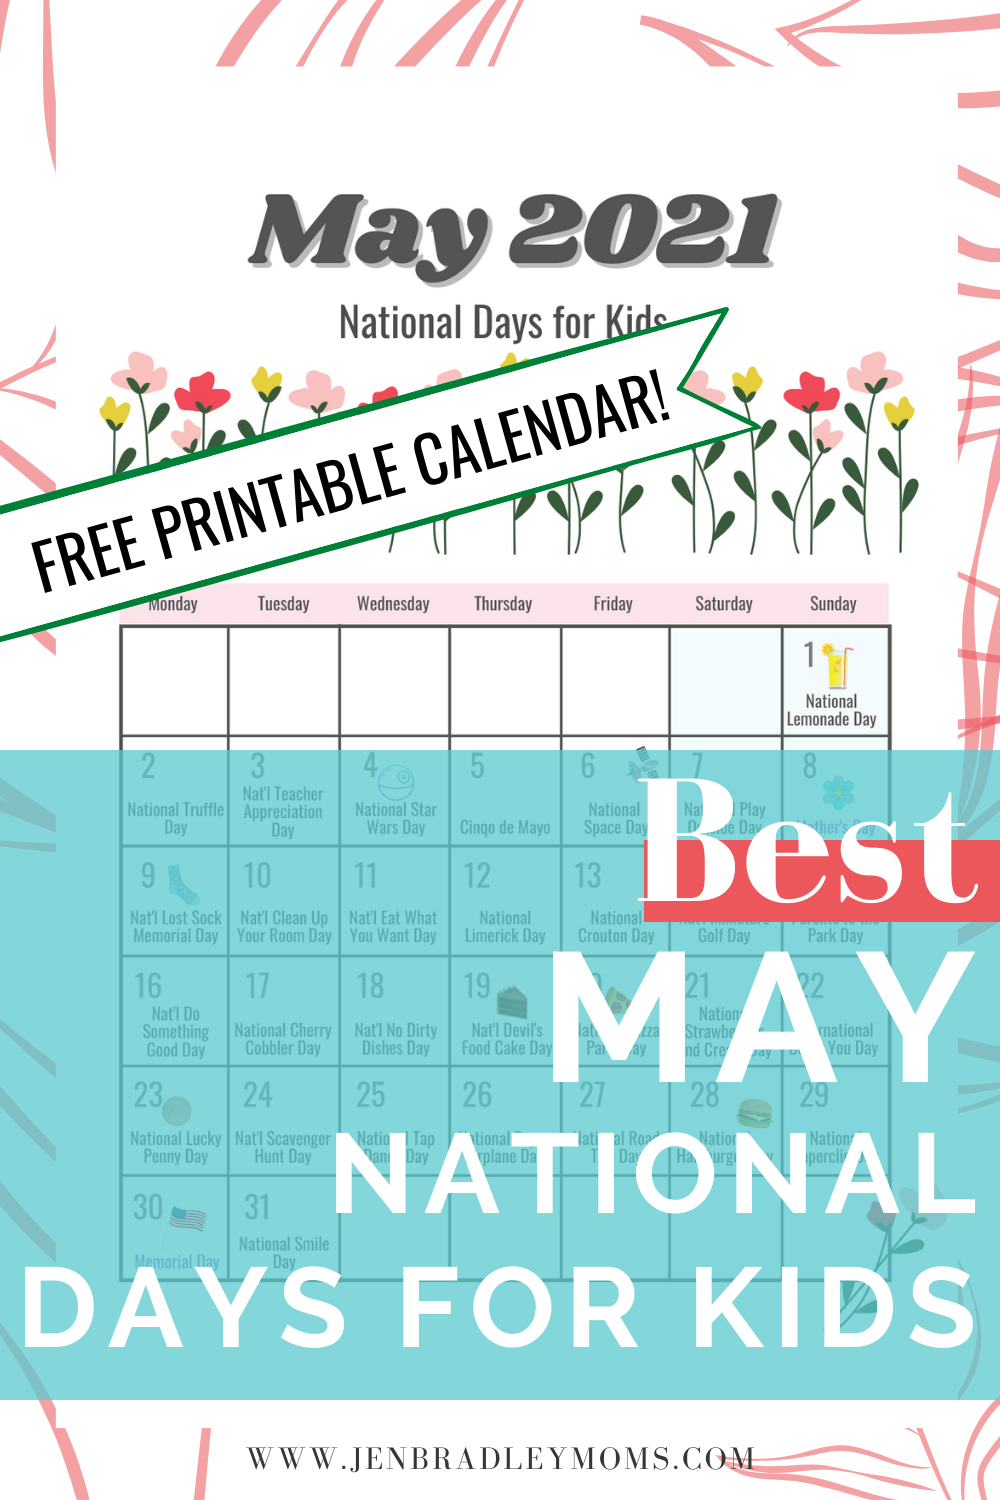 The Most Kid-Friendly National Days in May